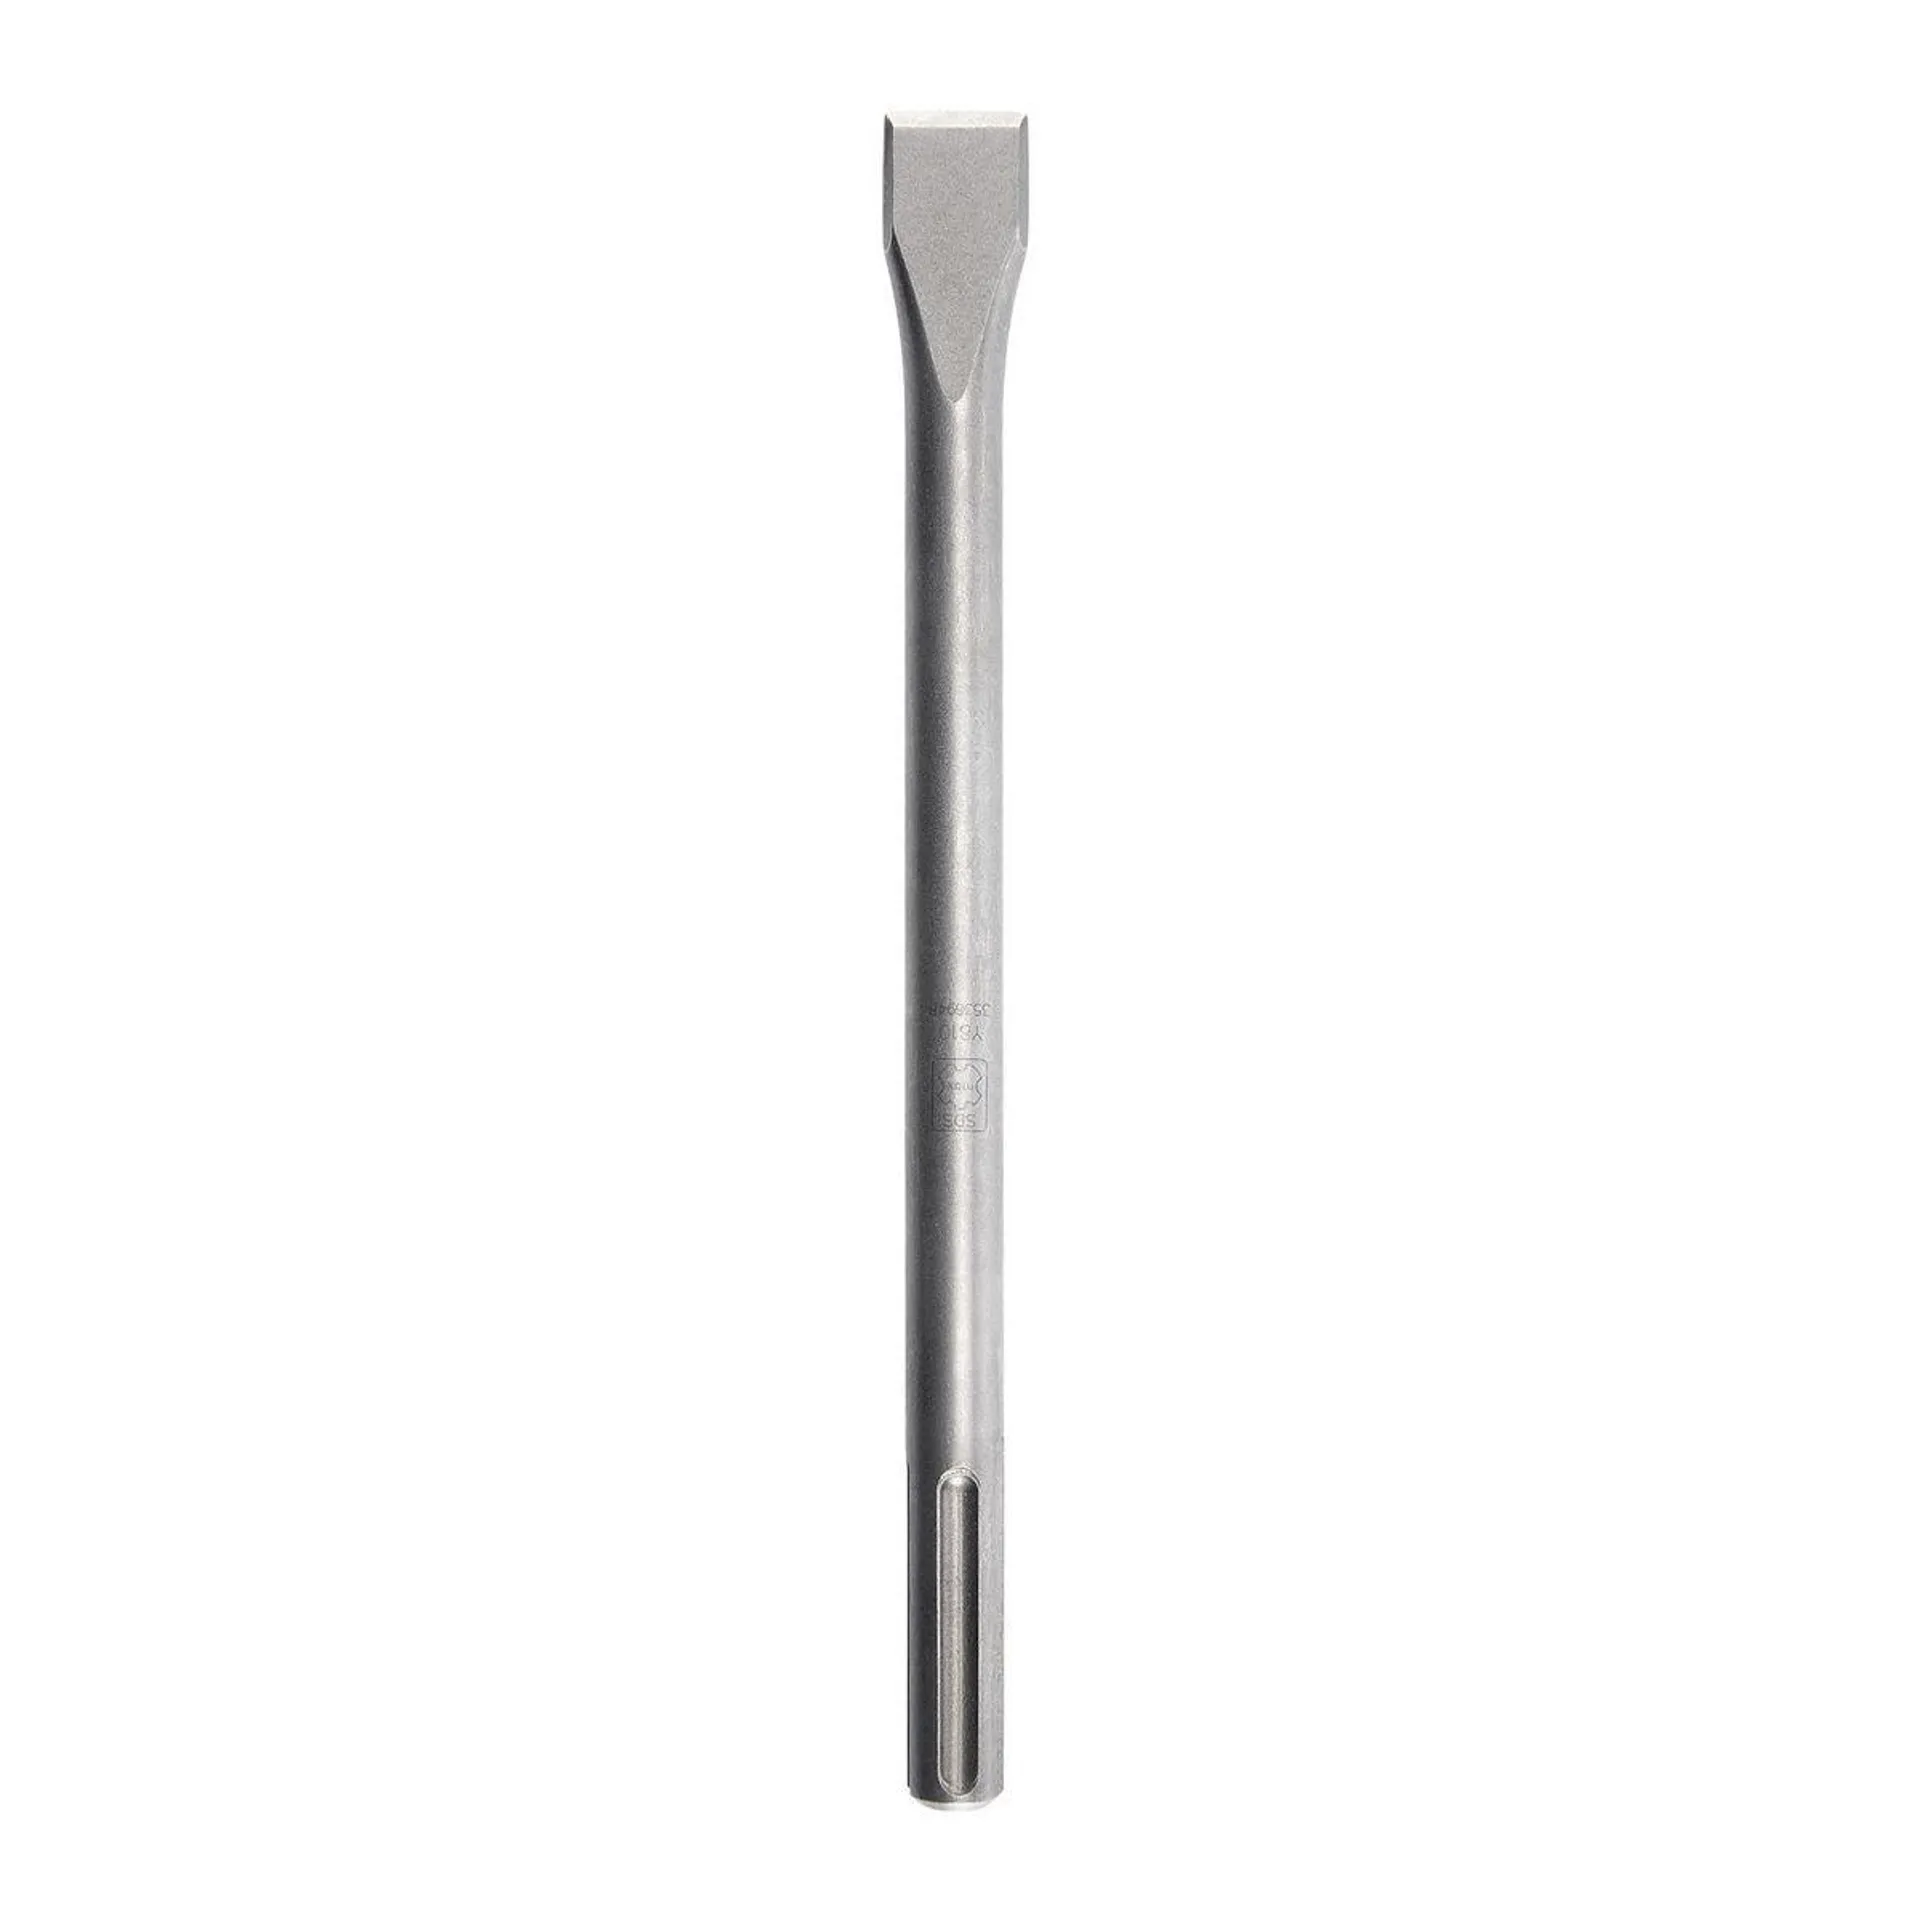 1 in. x 12 in. SDS-MAX Type Flat Chisel